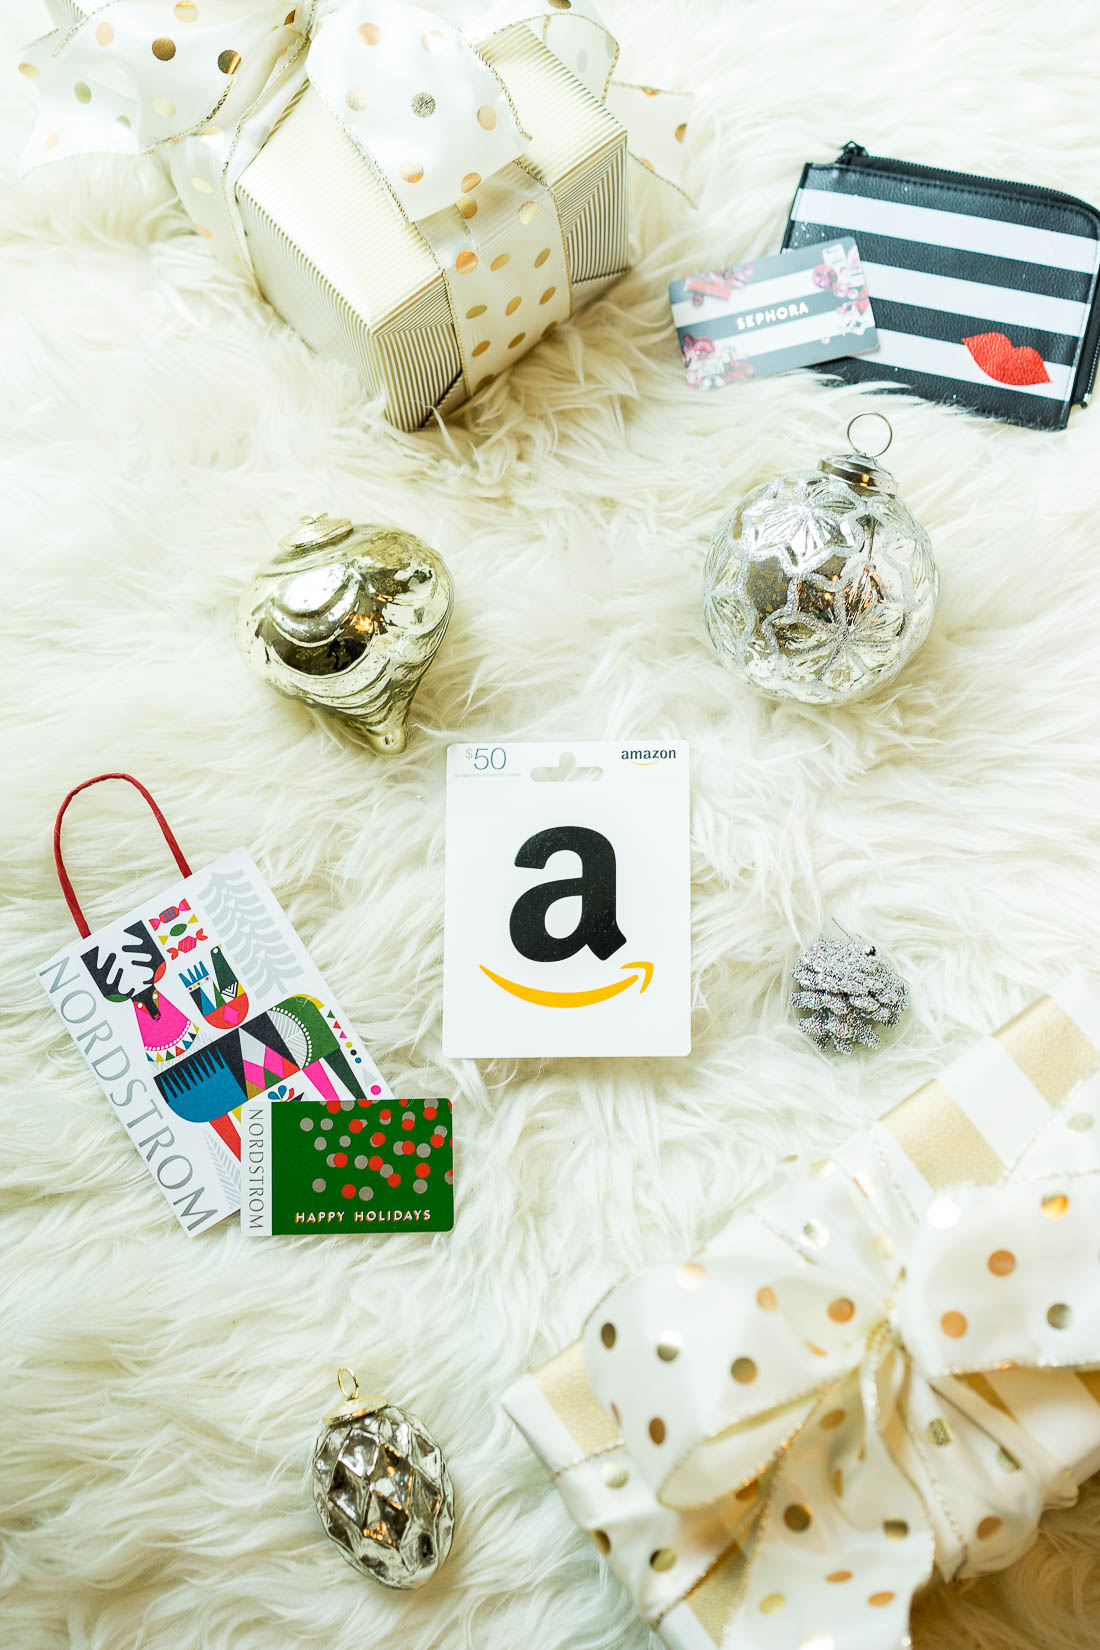 The best gift cards for last minute holiday gifting - Reviewed